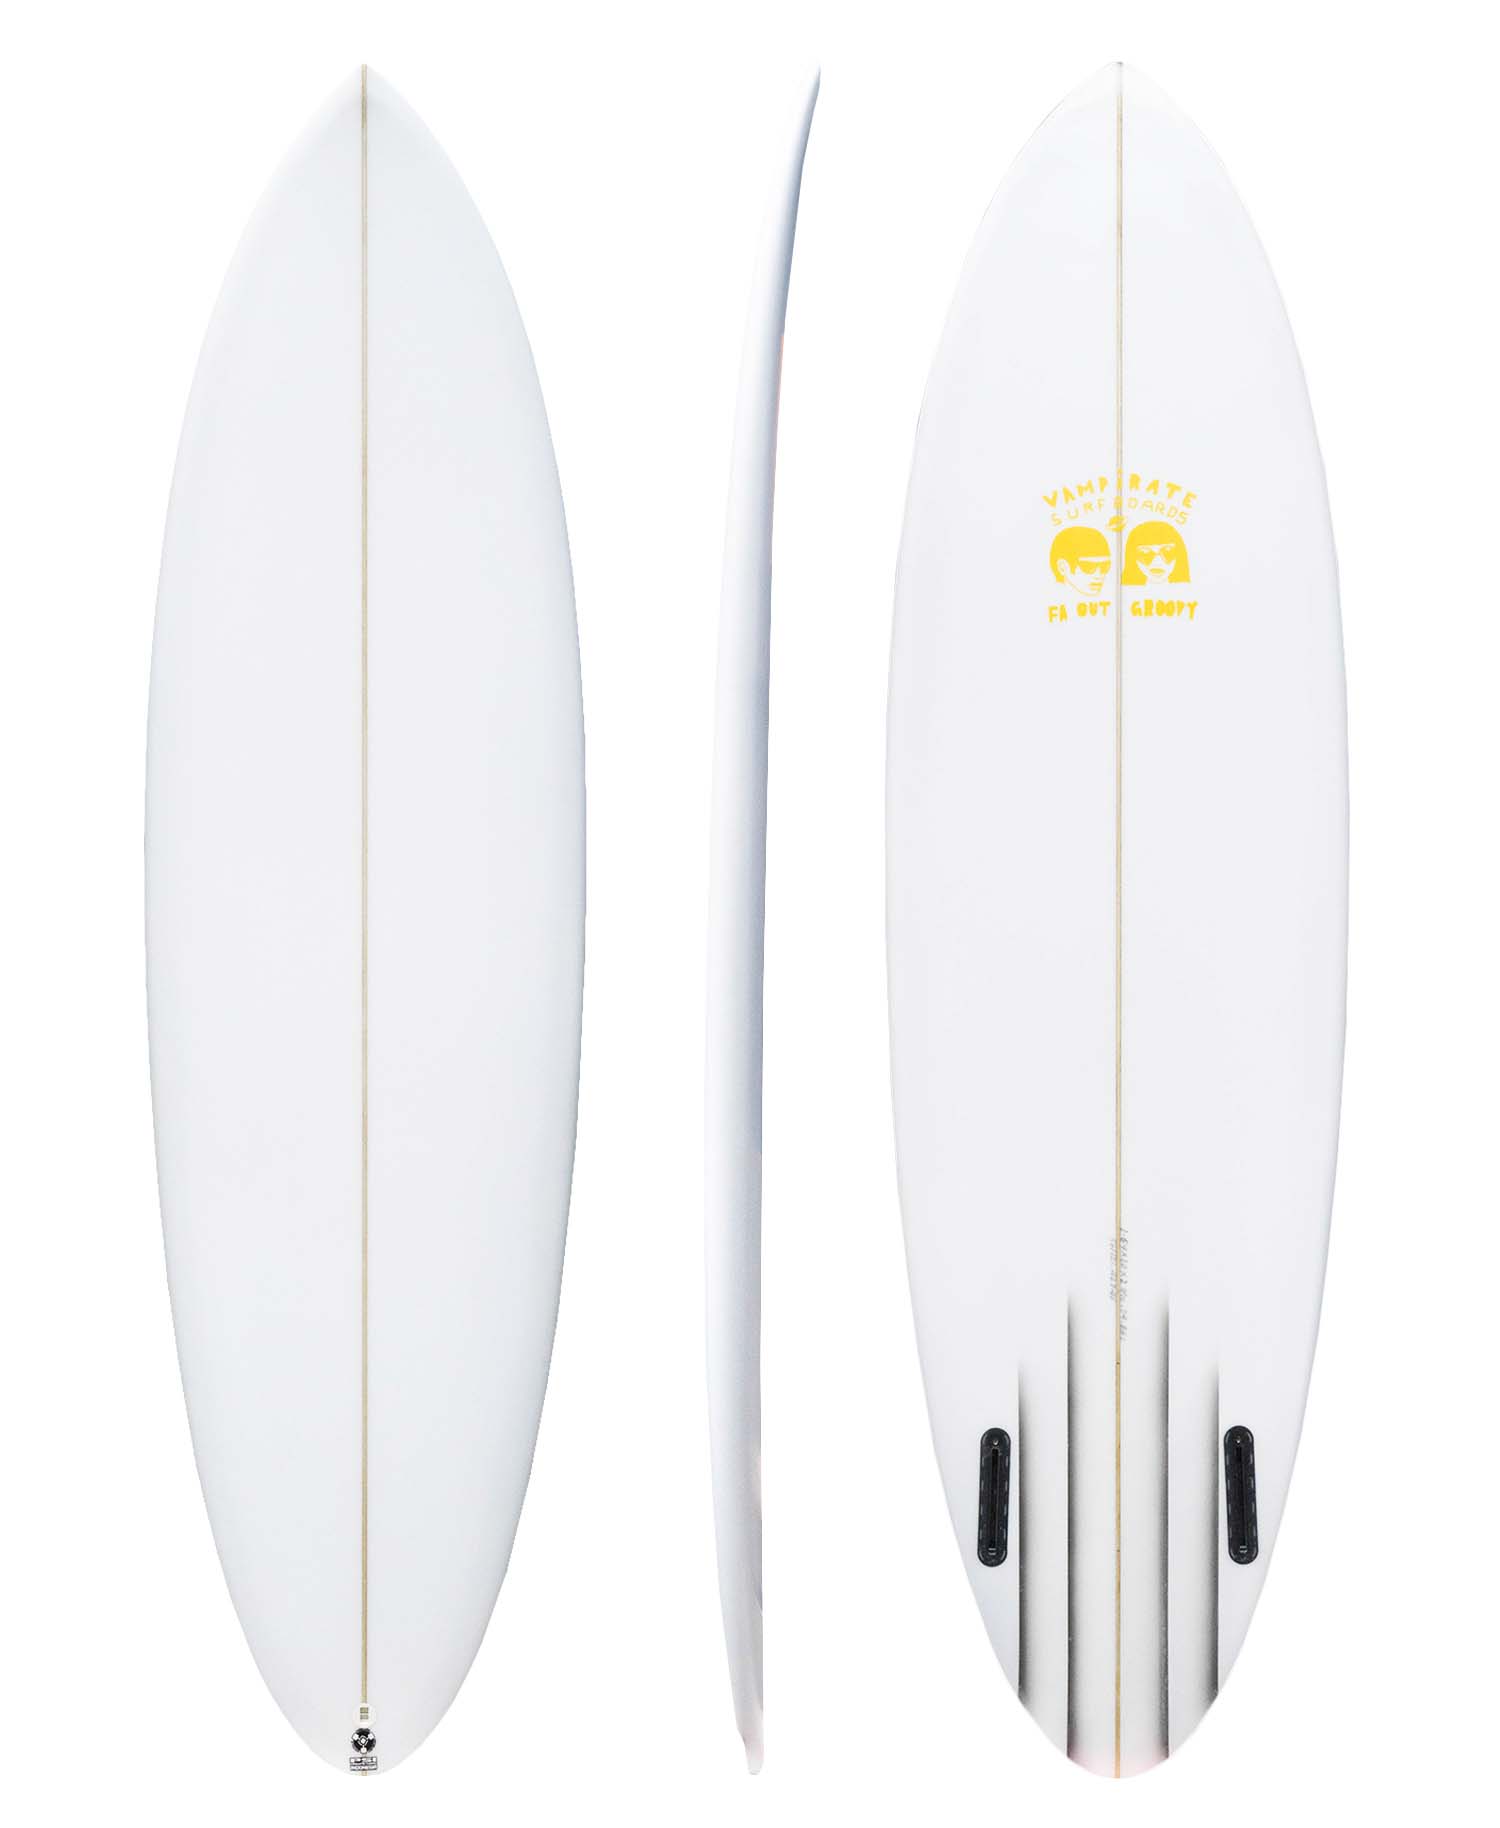 VAMPIRATE 'FAR OUT GROOVY' TWIN SURFBOARD